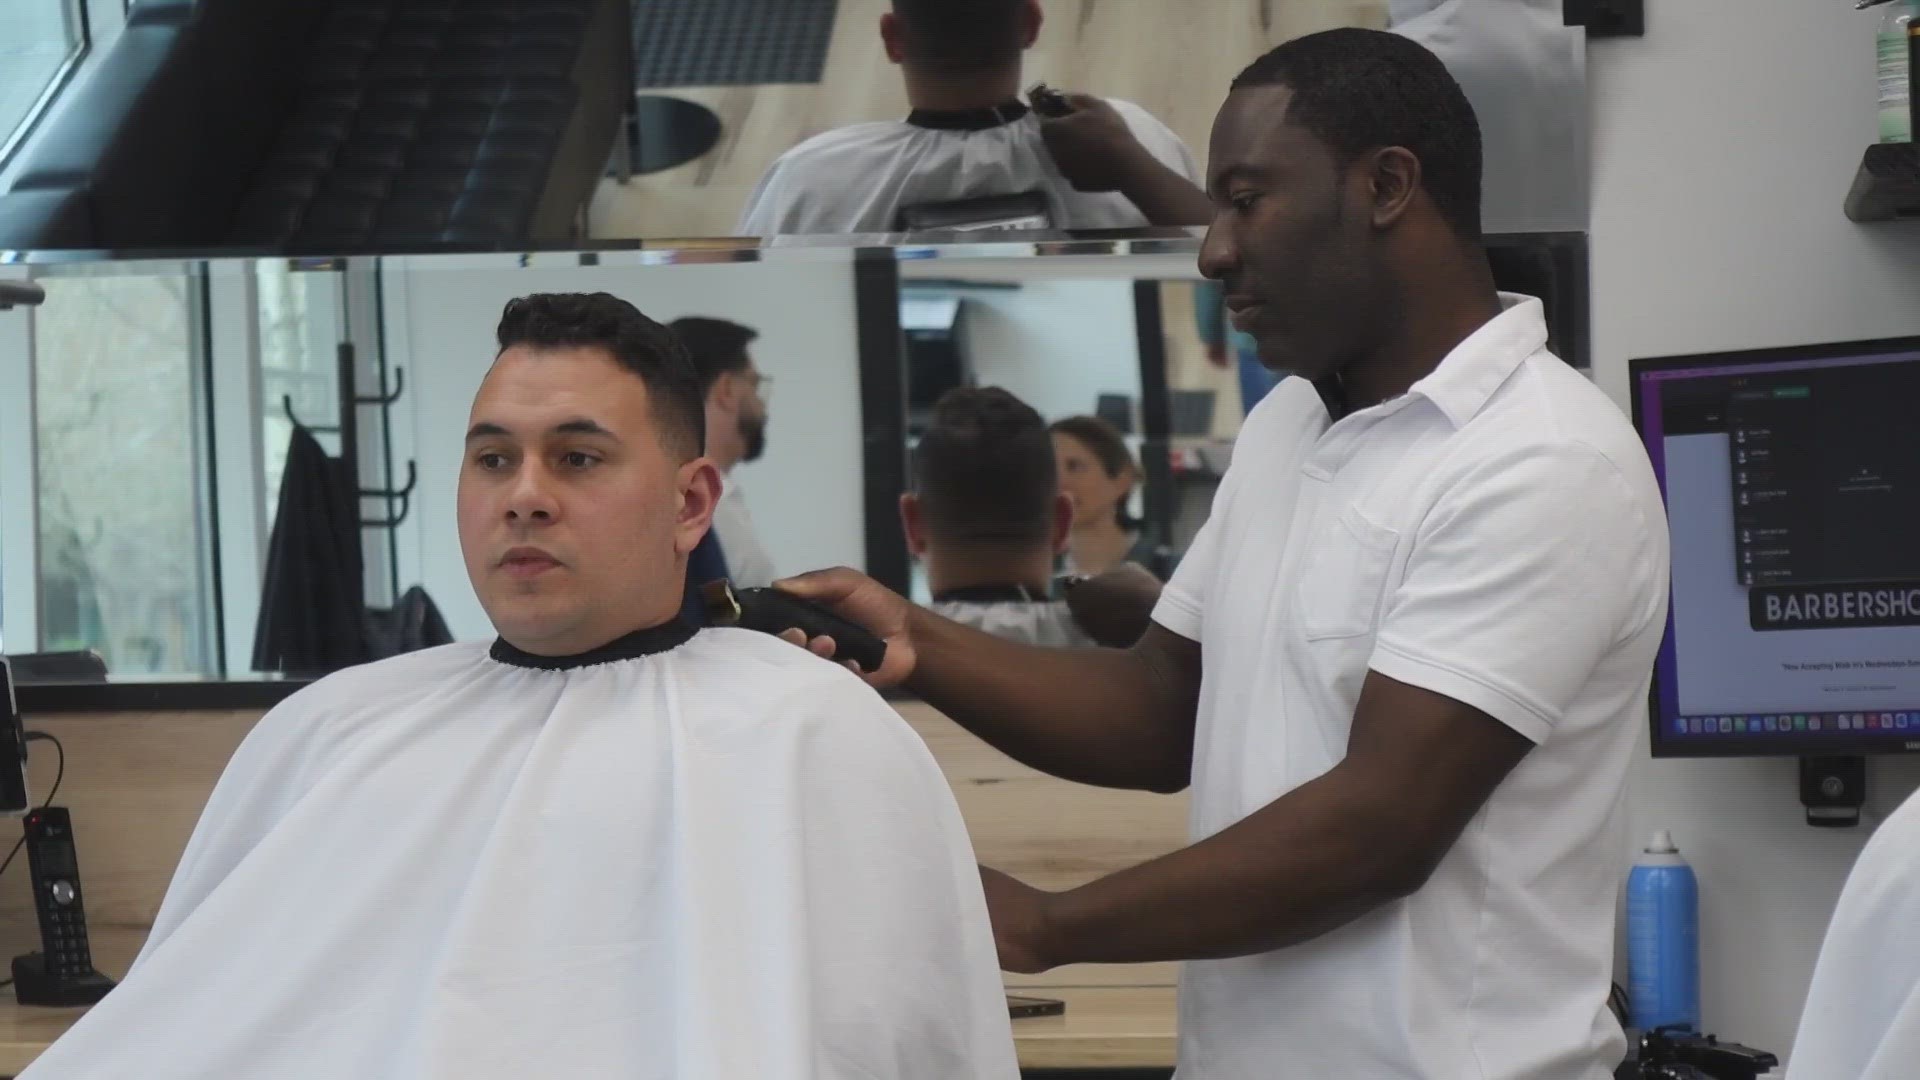 Staff at Rain City Barbershop provide free haircuts for those in the foster care system on Sundays.